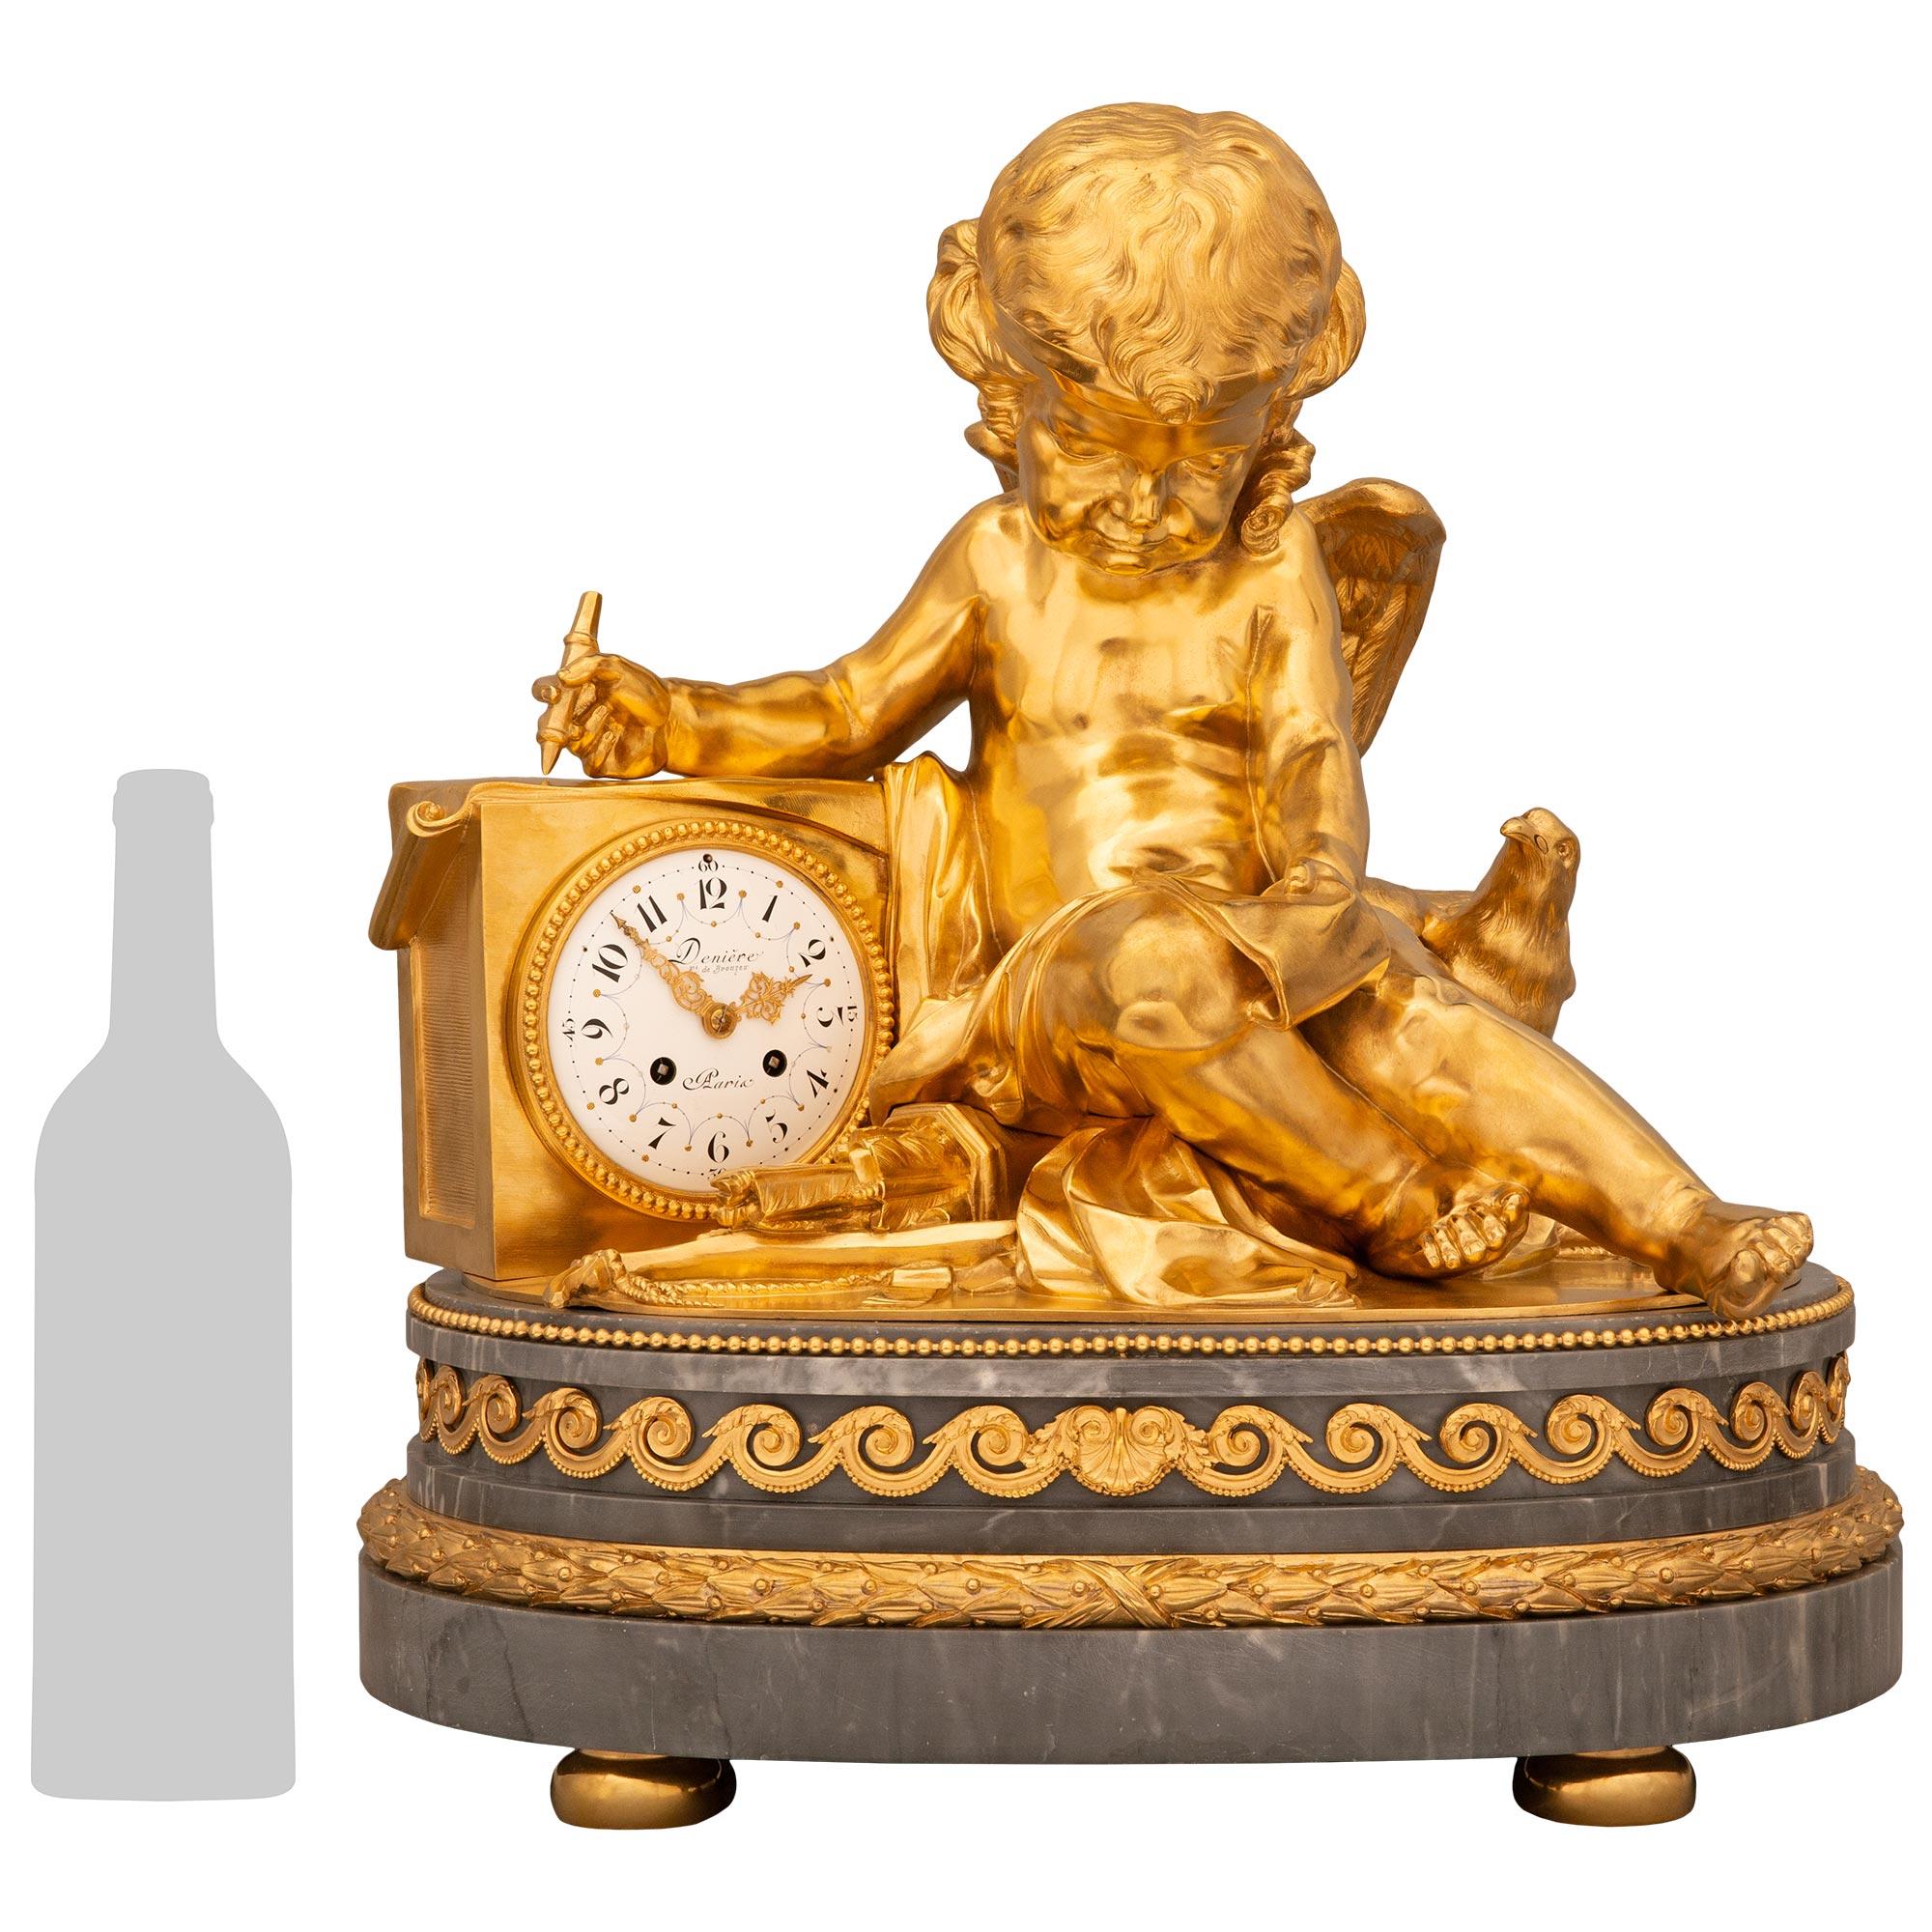 An impressive and finely decorated French 19th century Louis XVI st. Gris St. Anne marble and Ormolu clock, signed Derniere. This exquisite and high quality clock is raised on an impressive mottled Gris St. Anne marble pedestal supported by bun feet